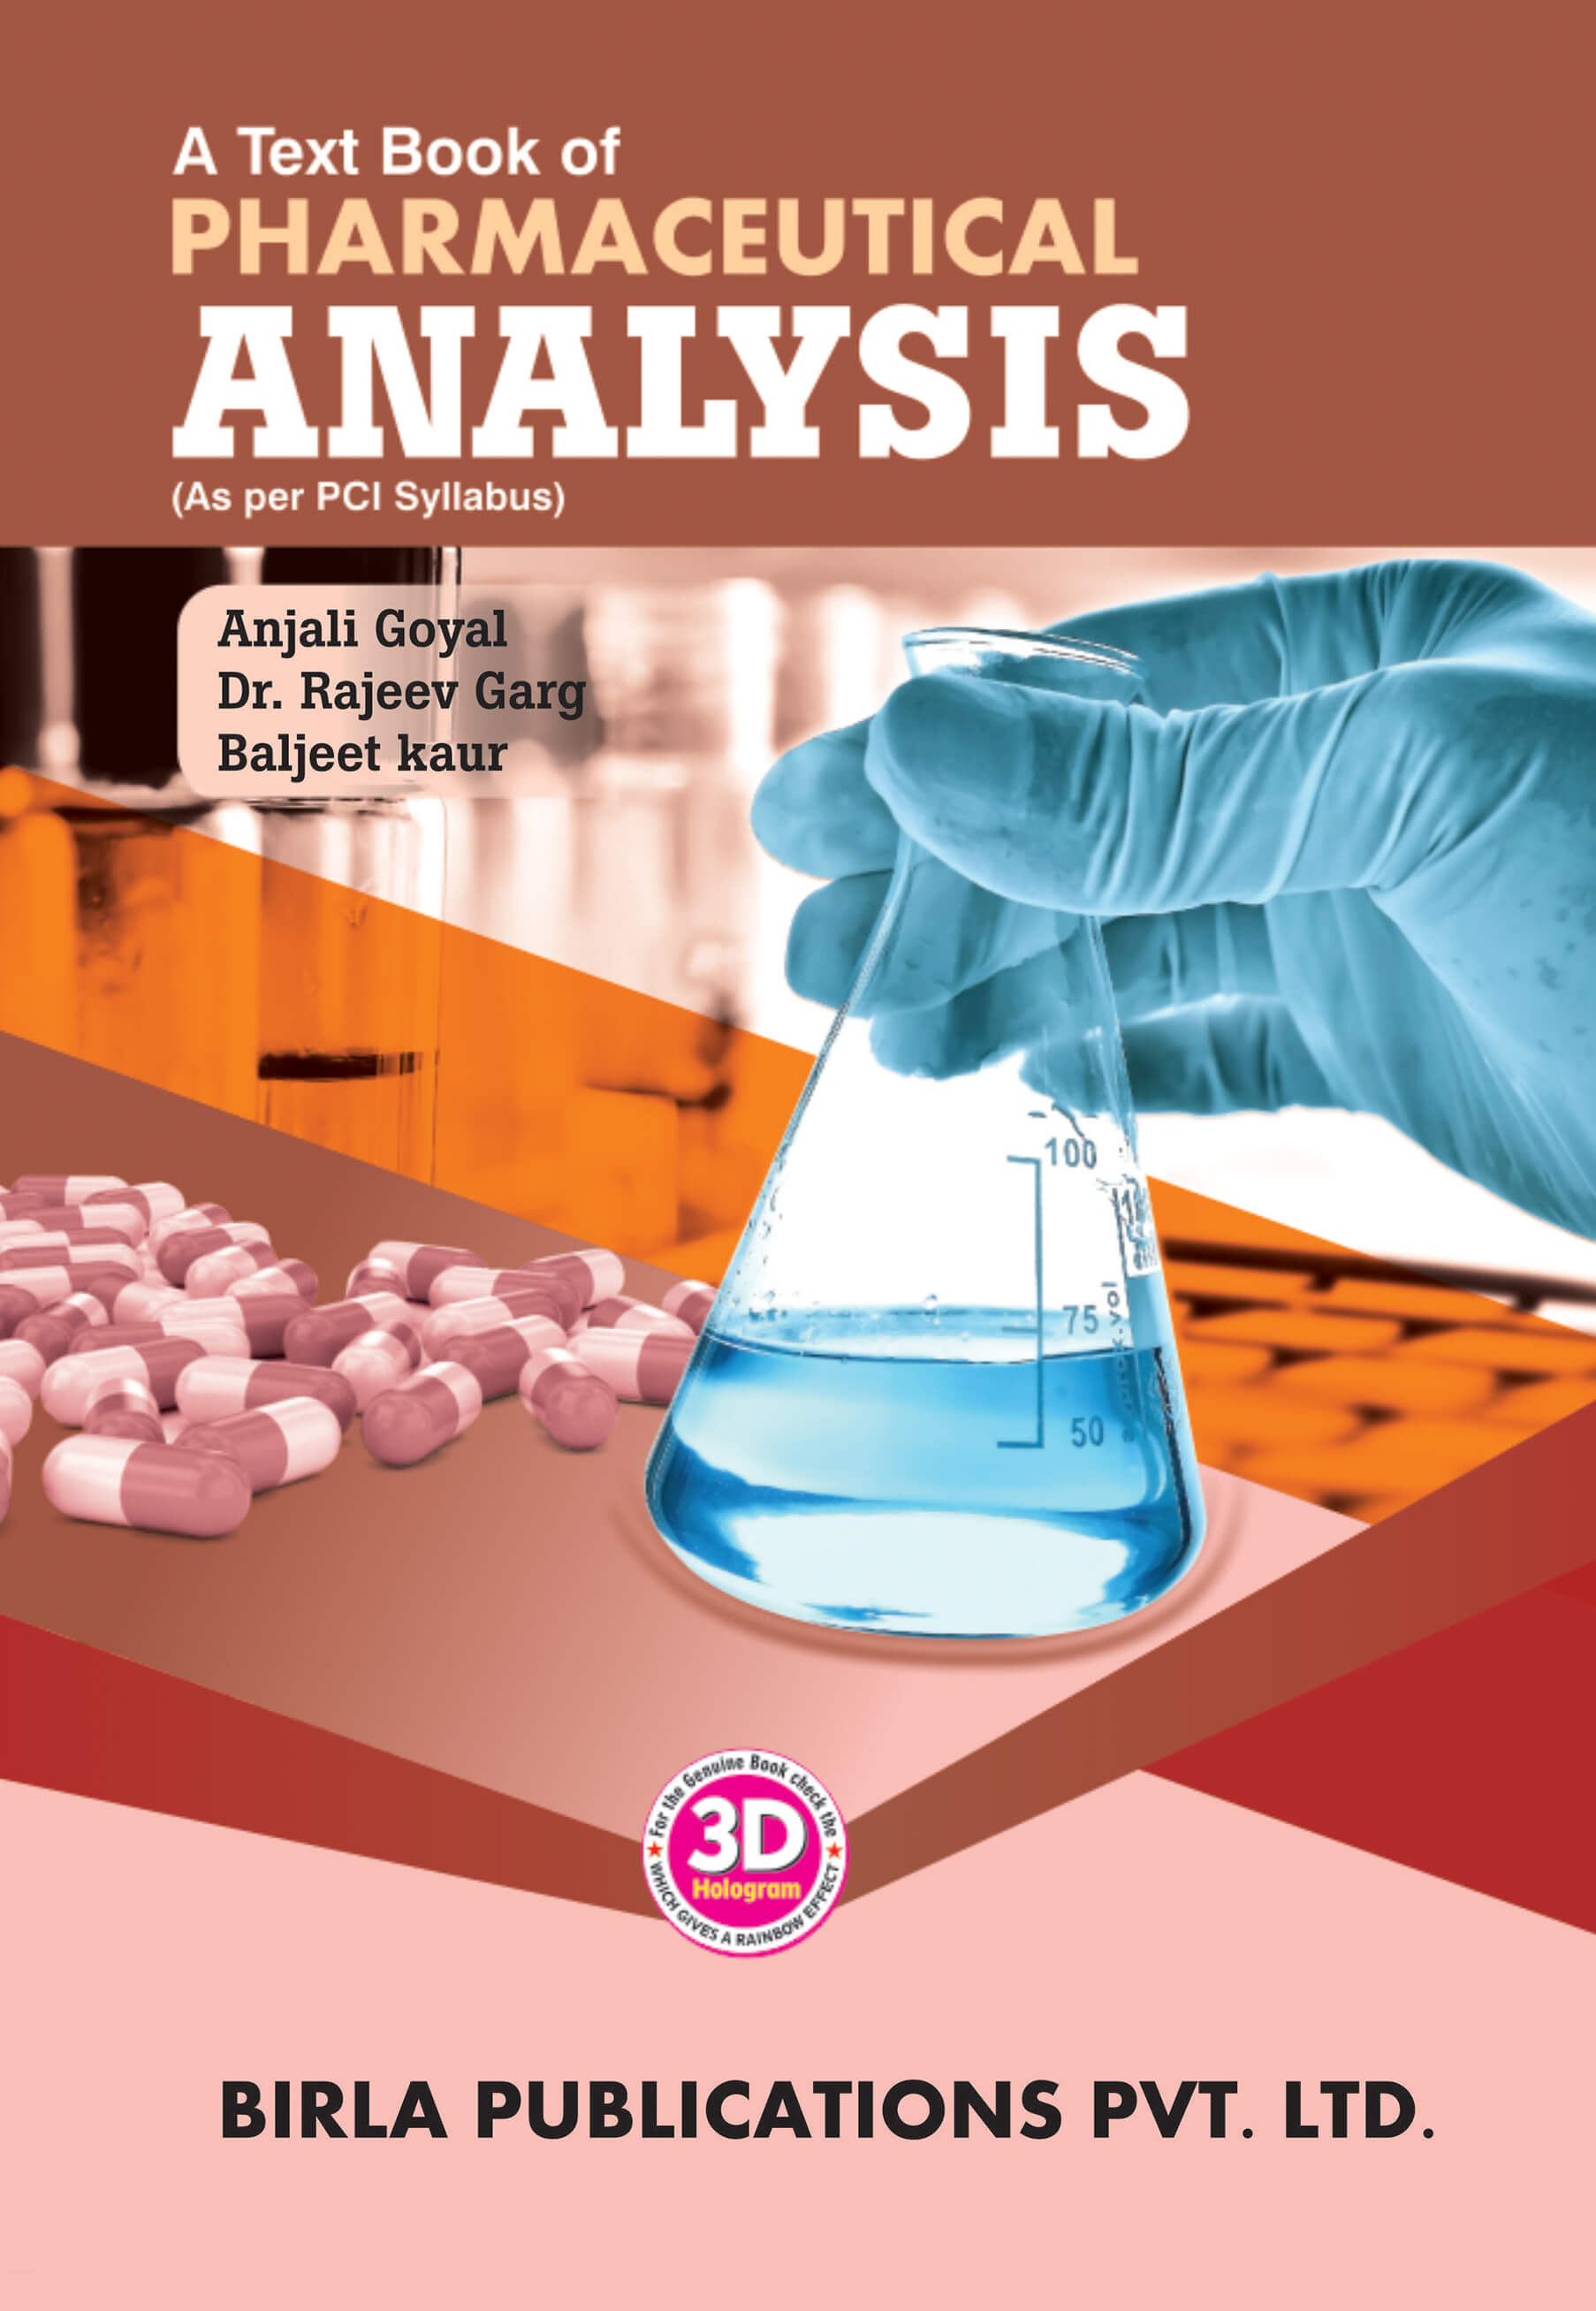 A TEXT BOOK OF PHARMACEUTICAL ANALYSIS